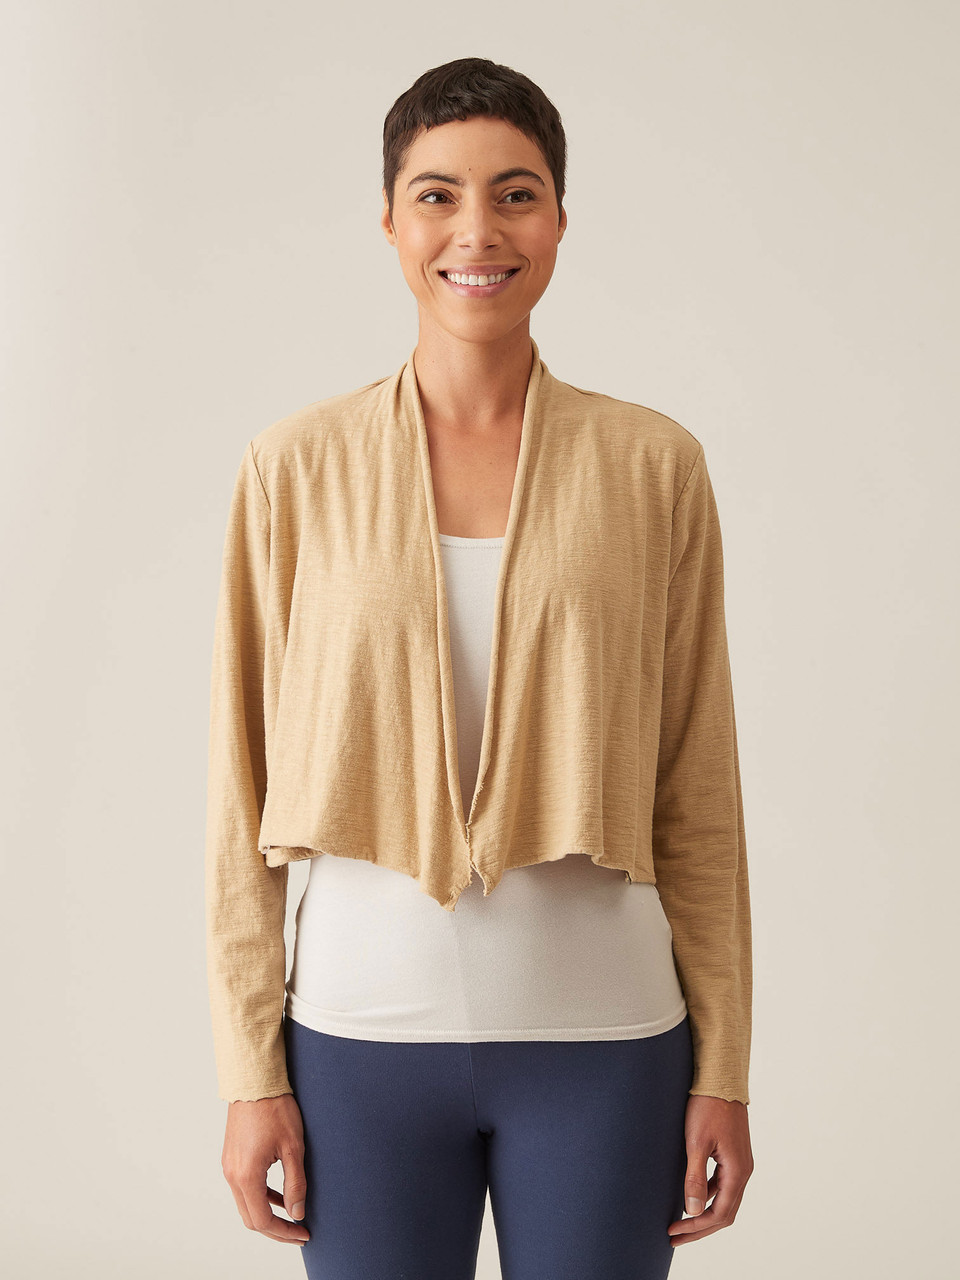 Cut Loose Linen Cotton Jersey Cropped Cardigan - New Moon Boutique